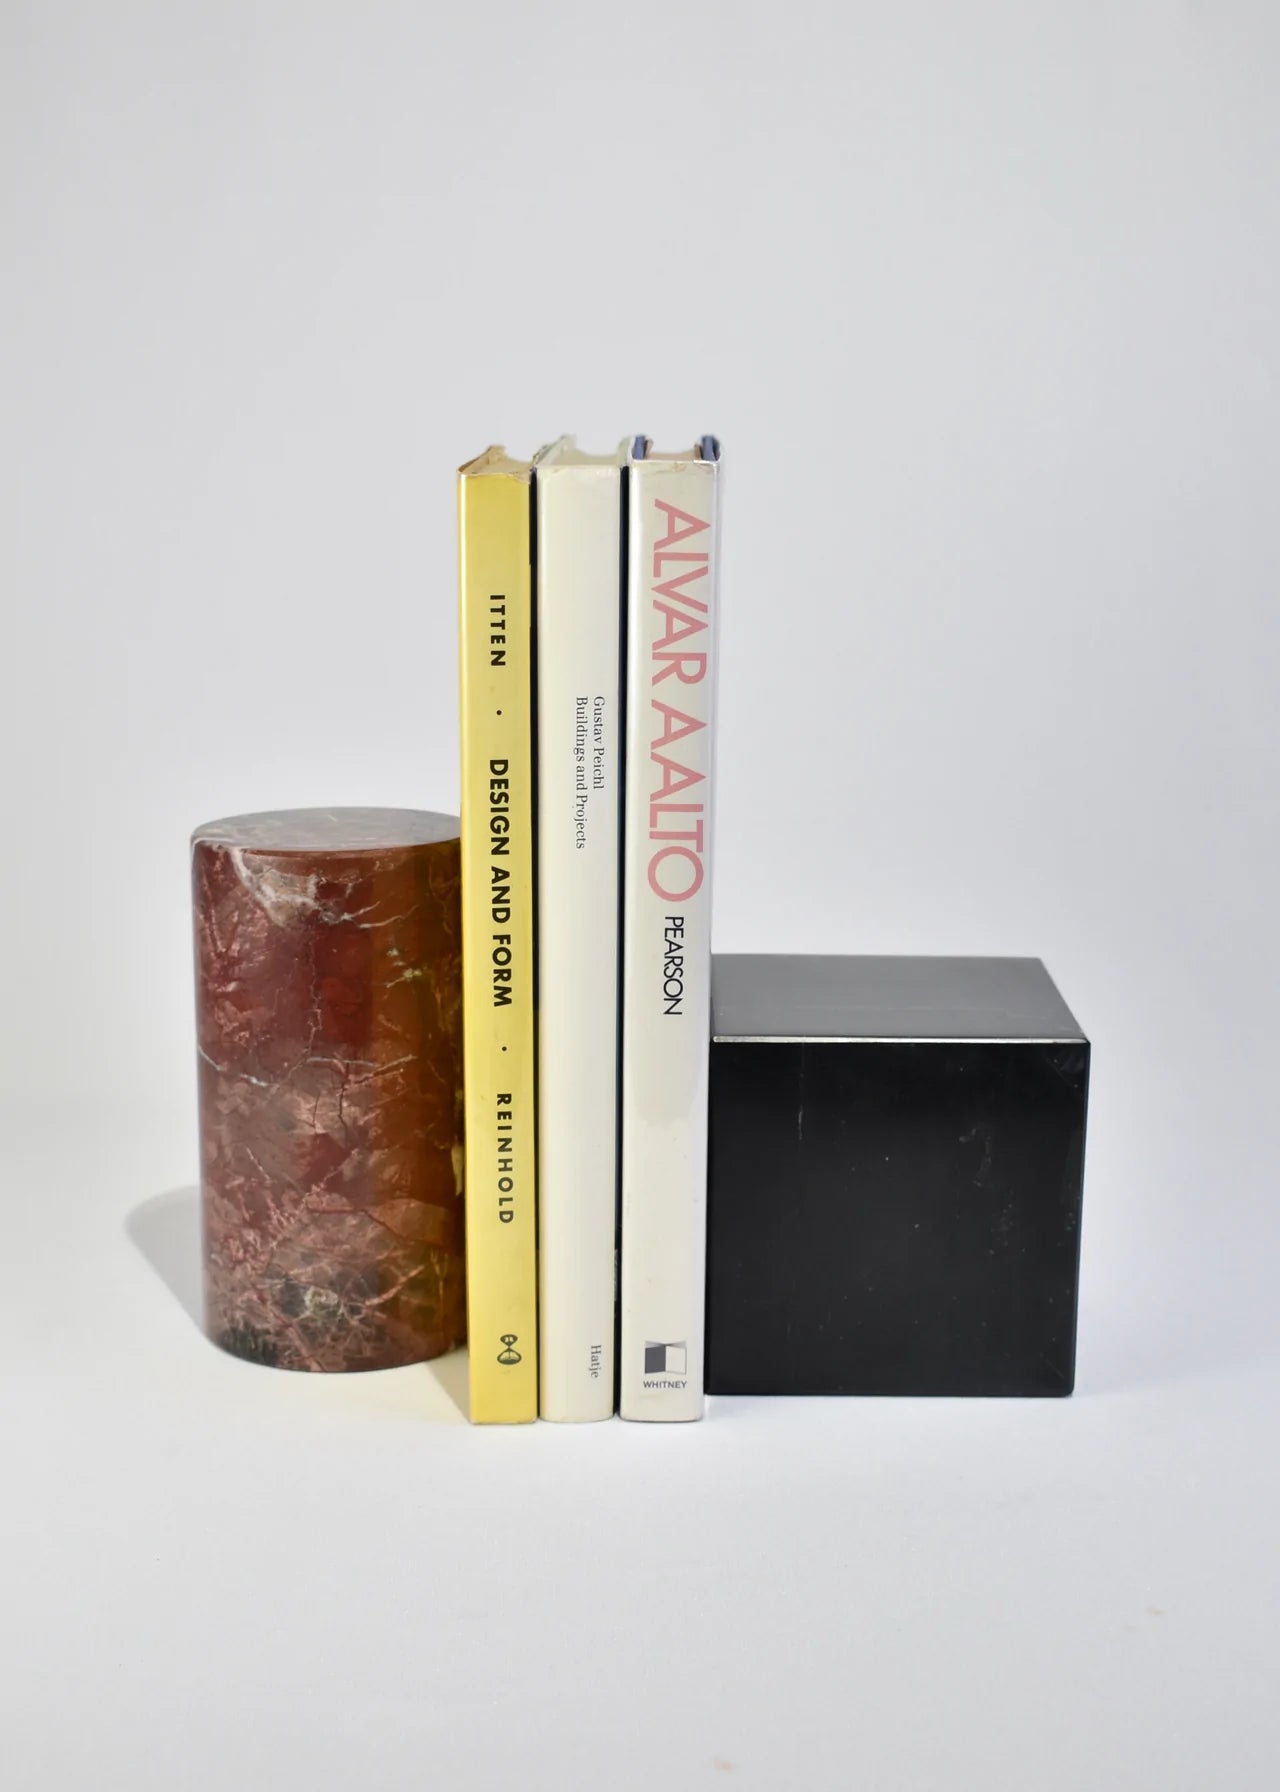 Cube Bookend - Black Onyx